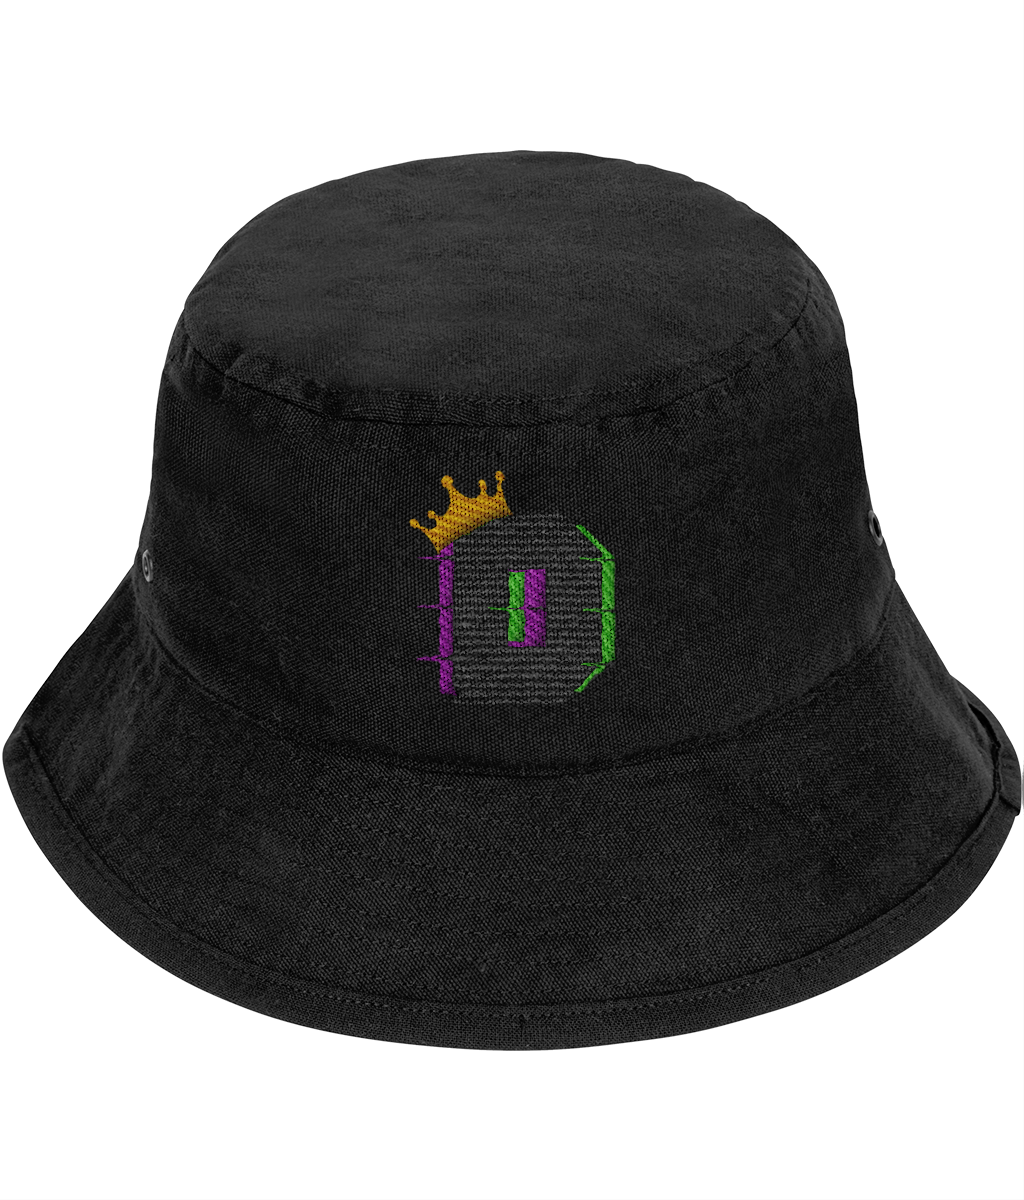 The King D42 Bucket Hat